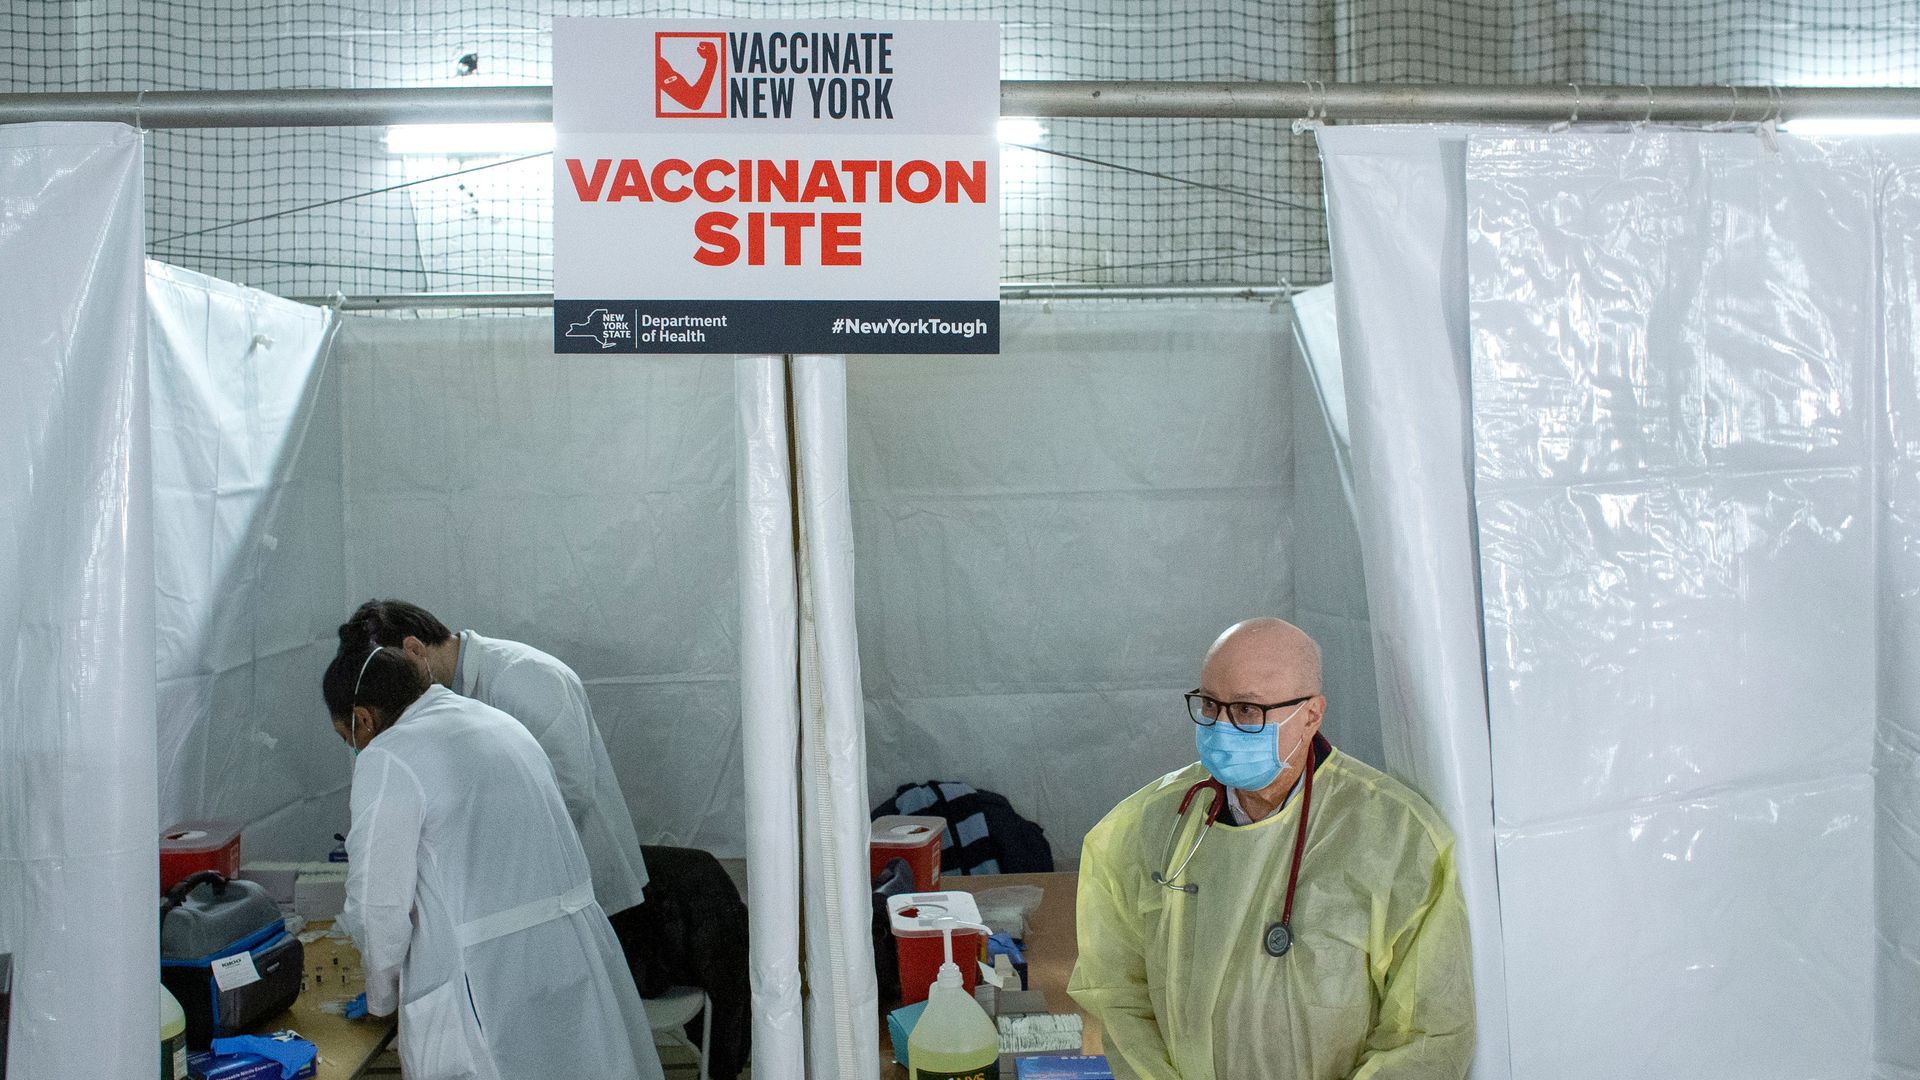 Picture of a vaccination site in New York